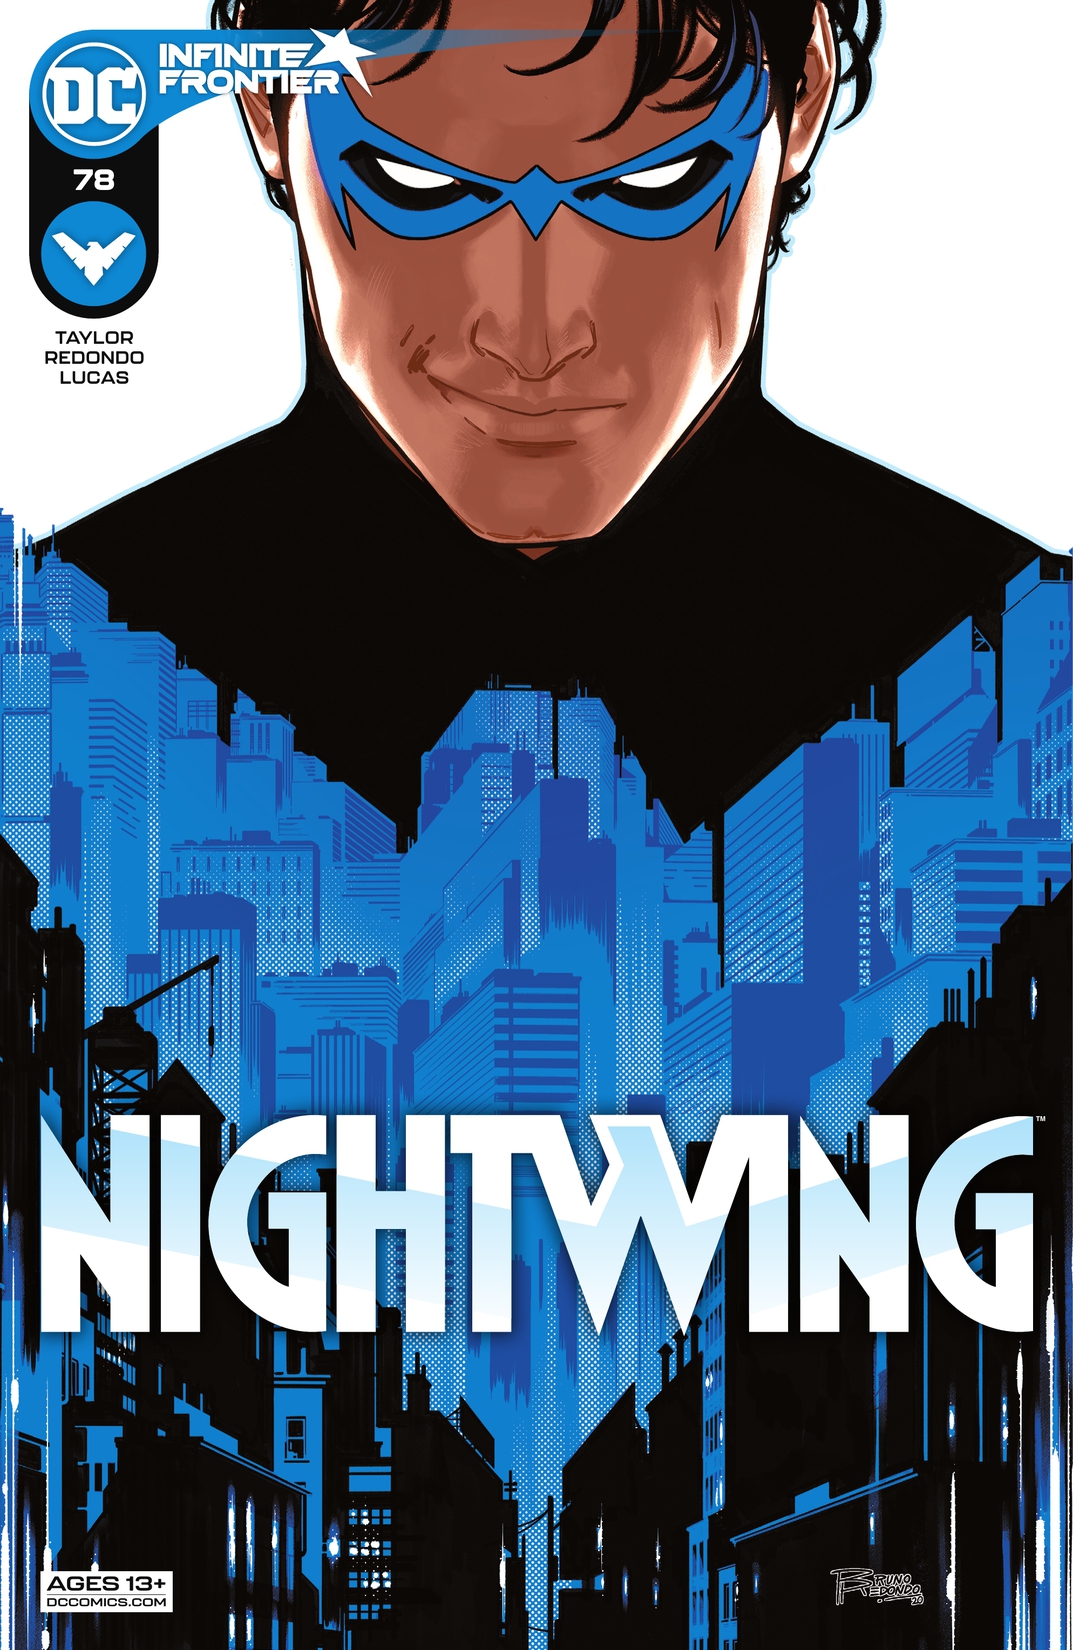 Nightwing (2016-) #78 preview images